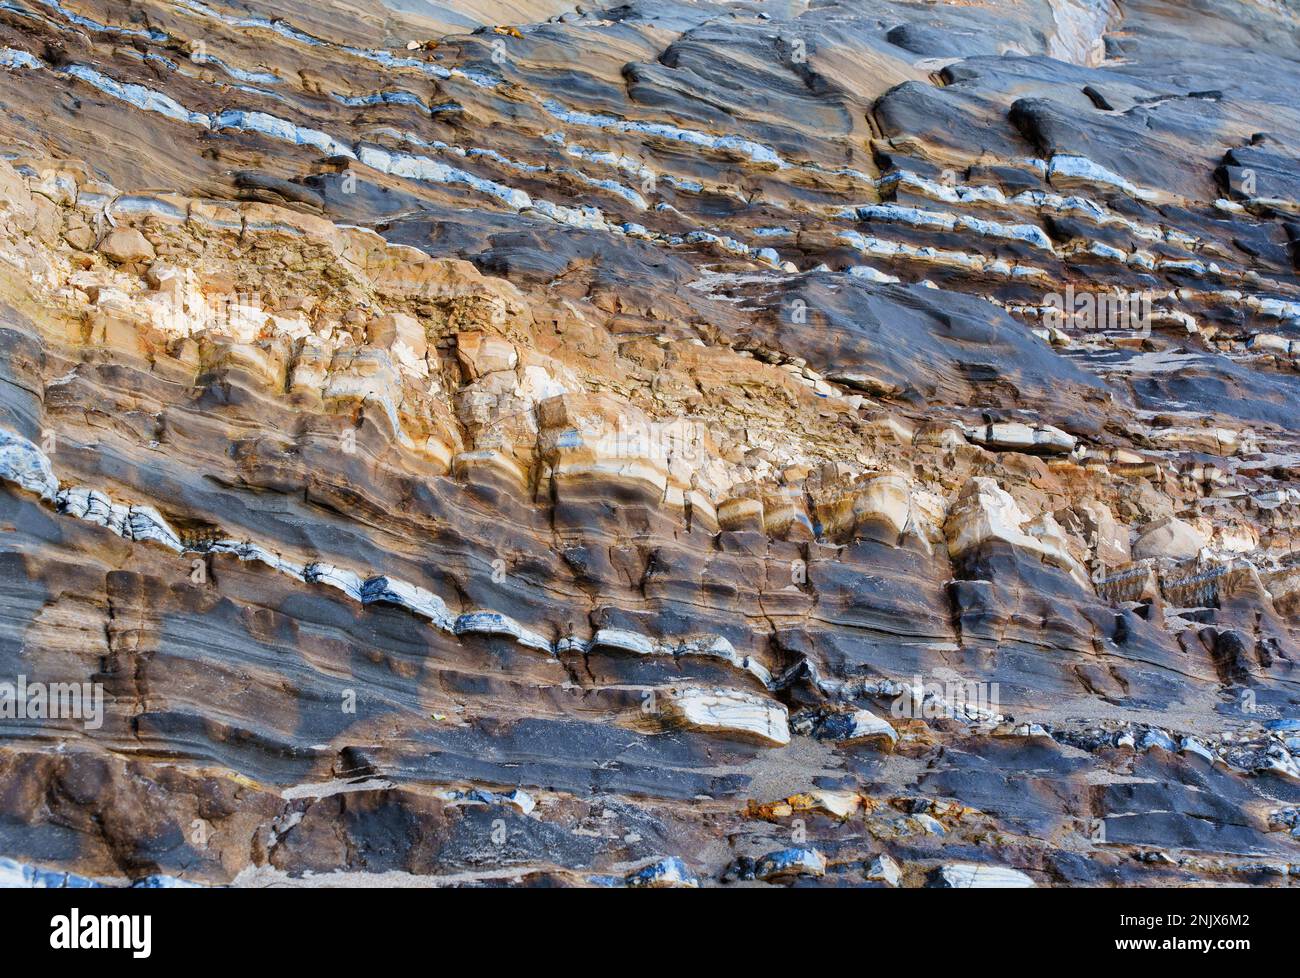 Natural beauty and texture of layered rocks. Earthy and organic abstract background. Stock Photo